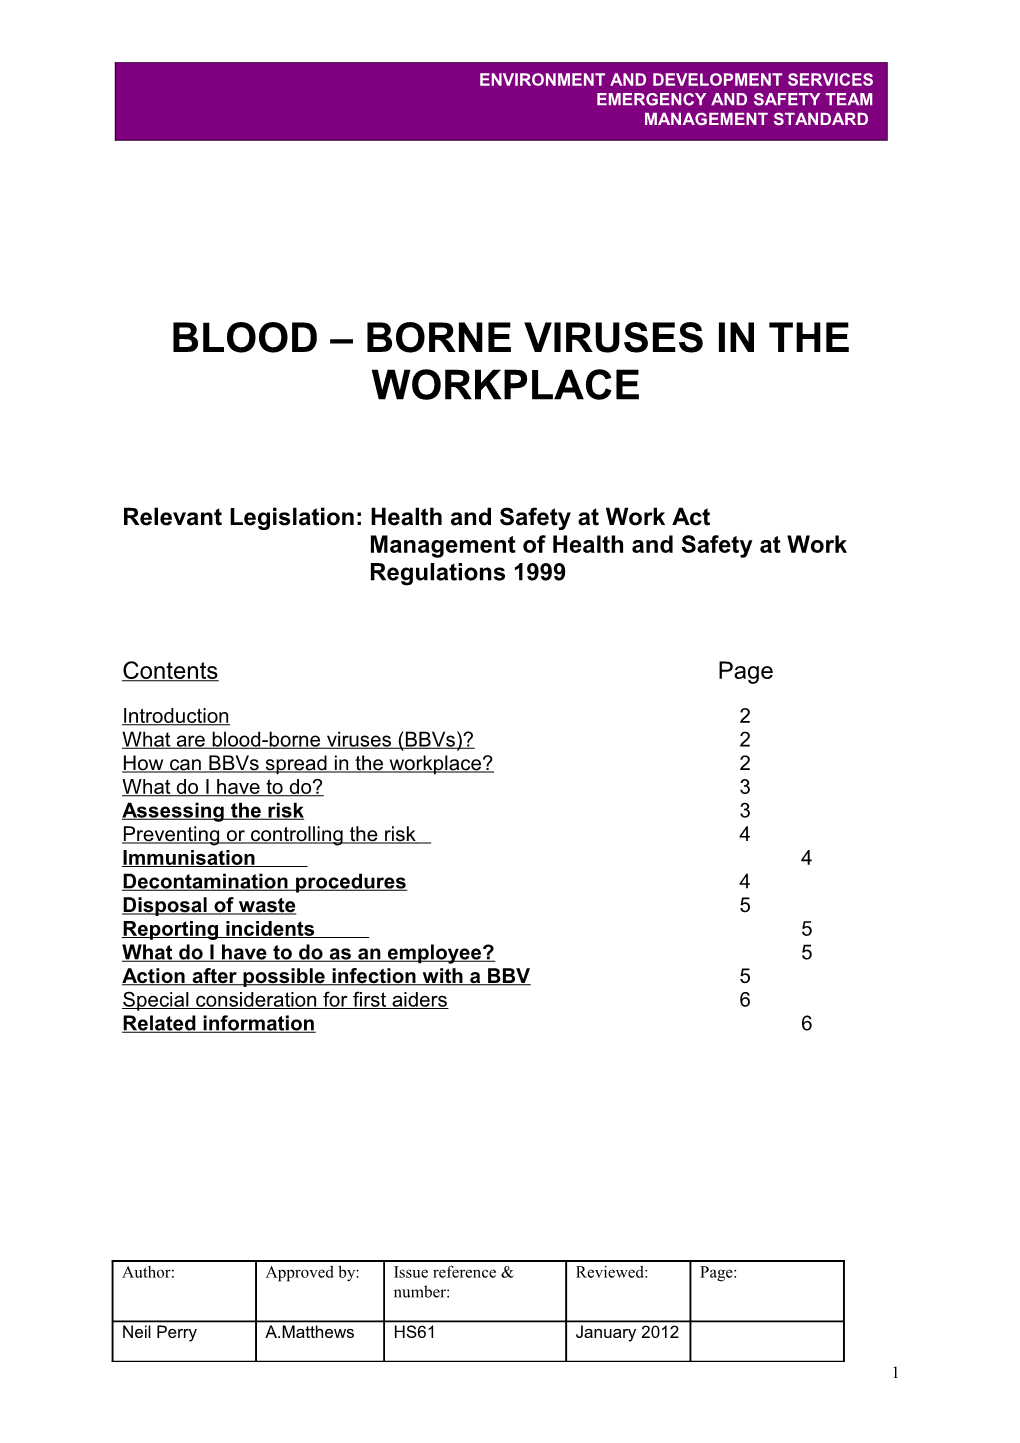 Blood-Borne Viruses in the Workplace